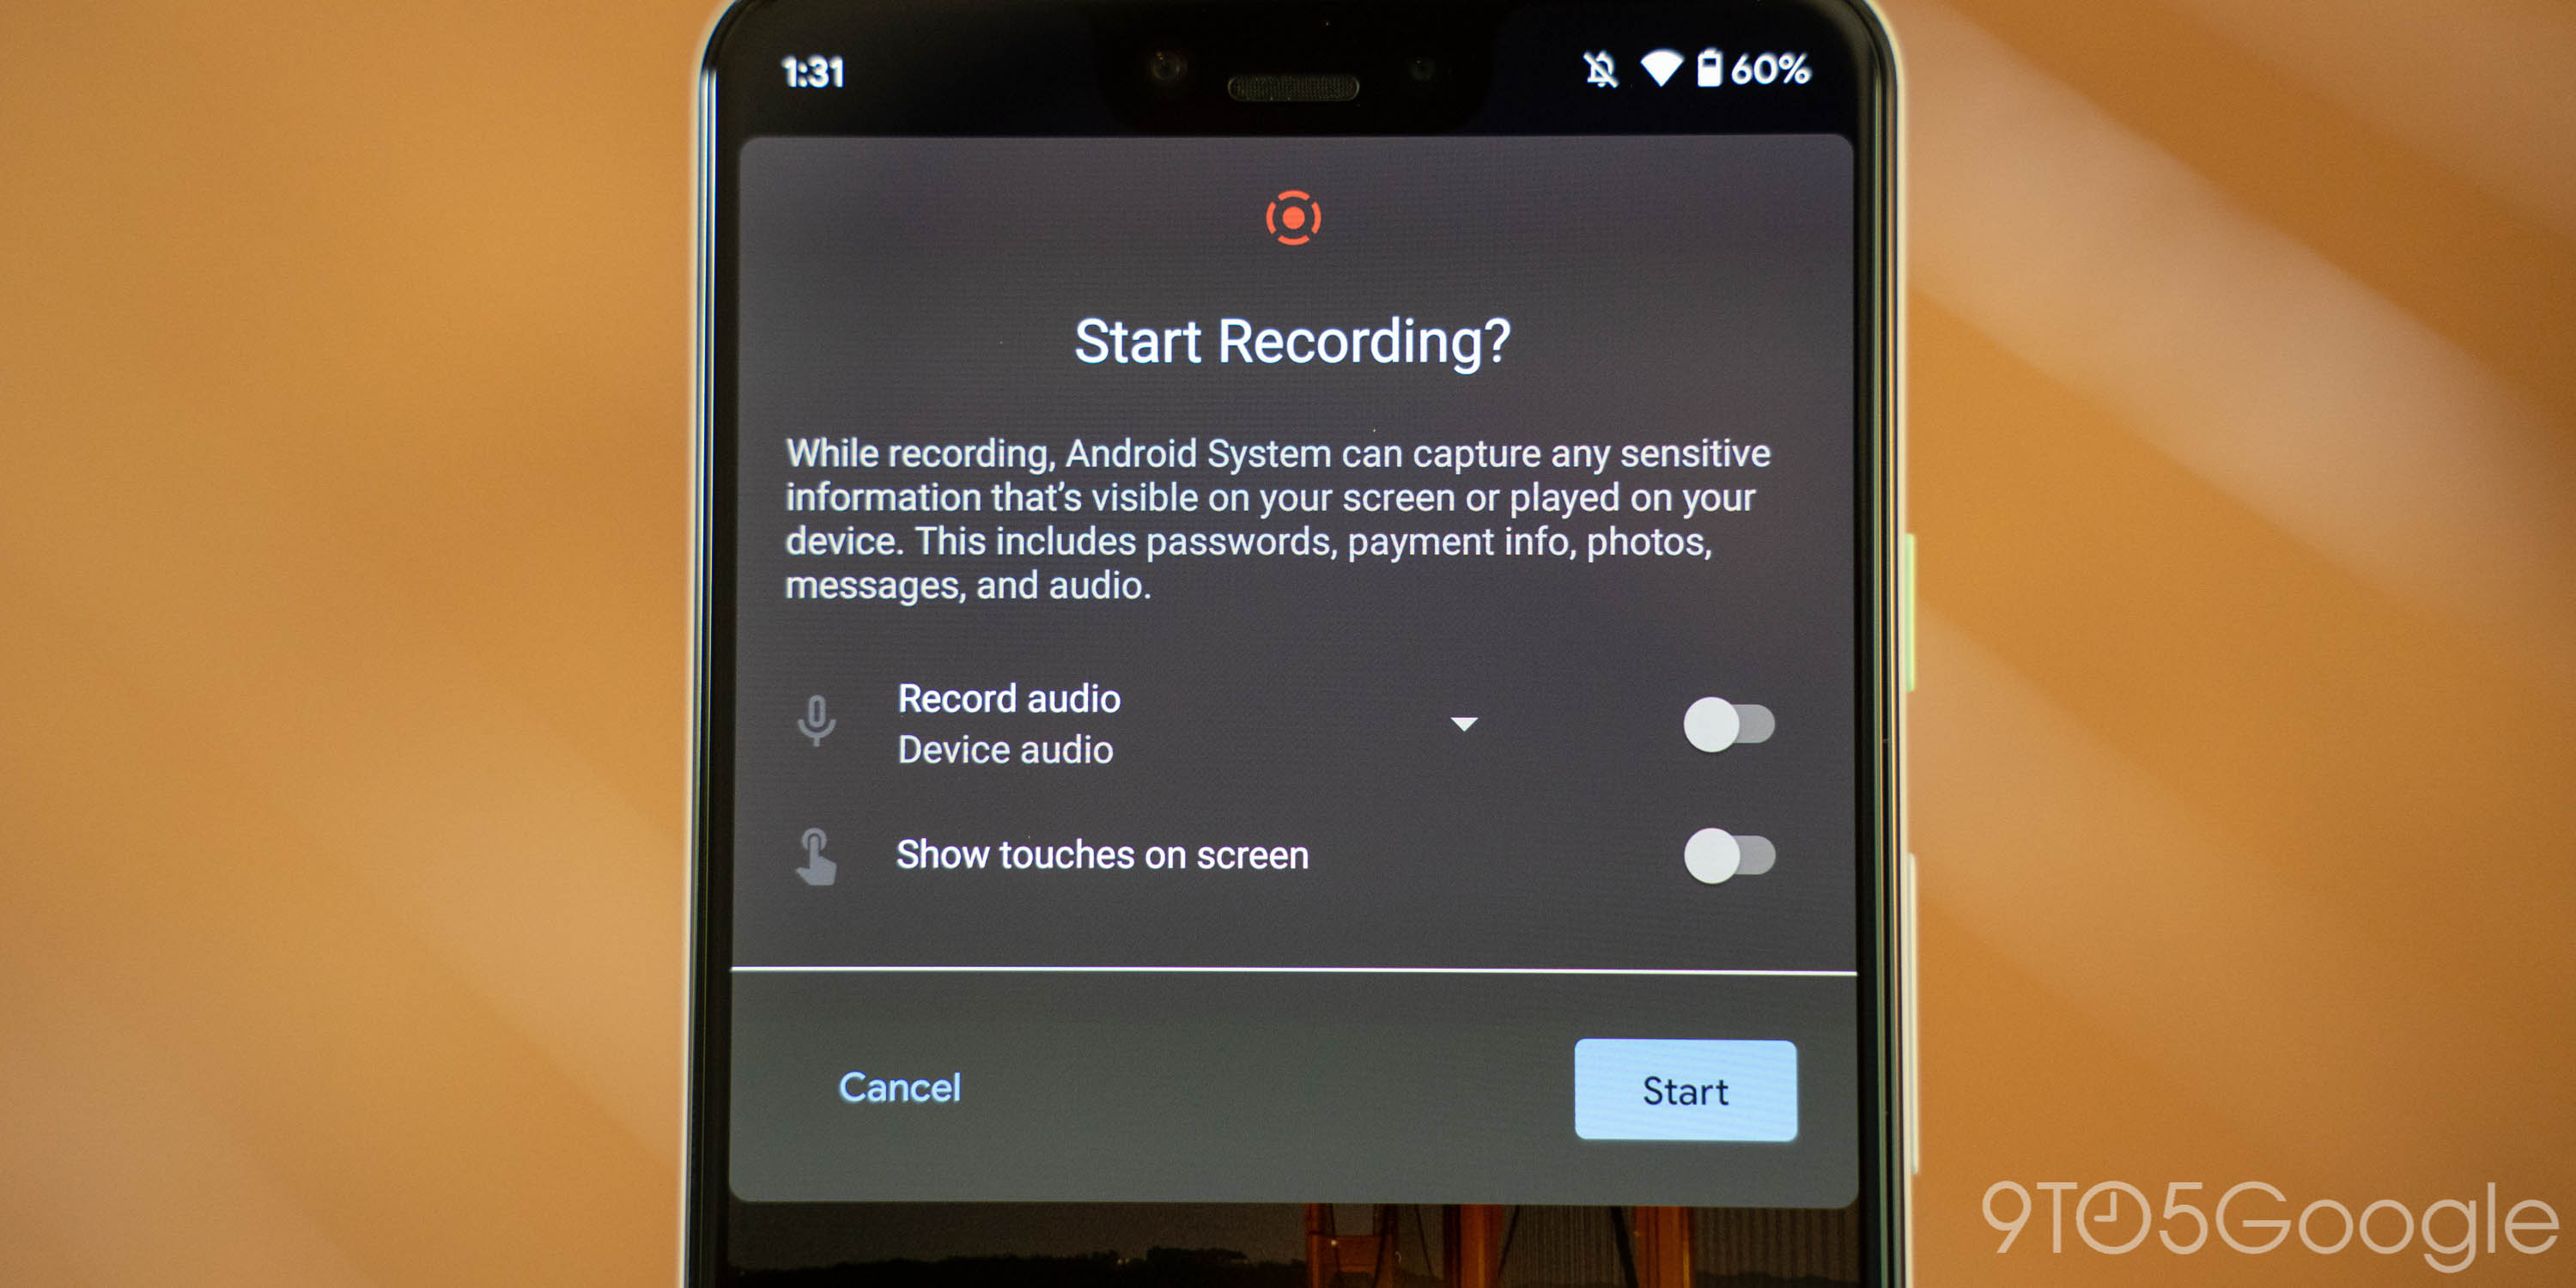 free screen recorder for android